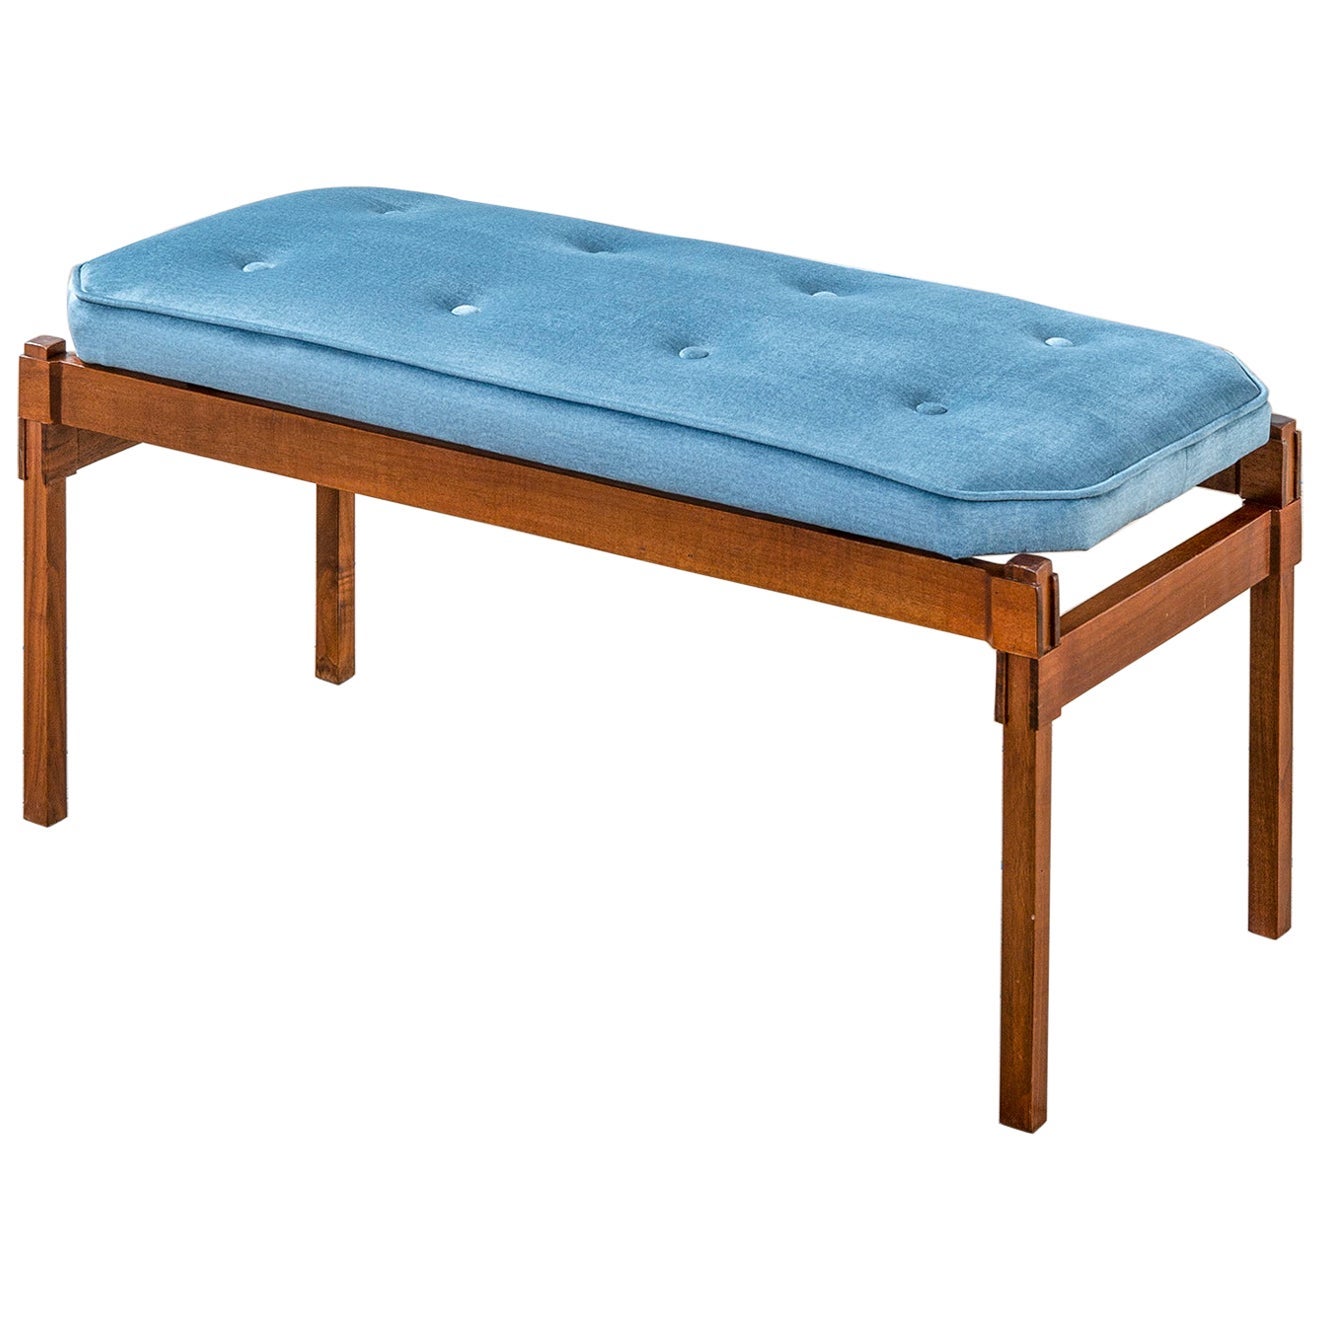 20th Century Ico Parisi Bench with Wooden Structure and Fabric Seating, Blue For Sale